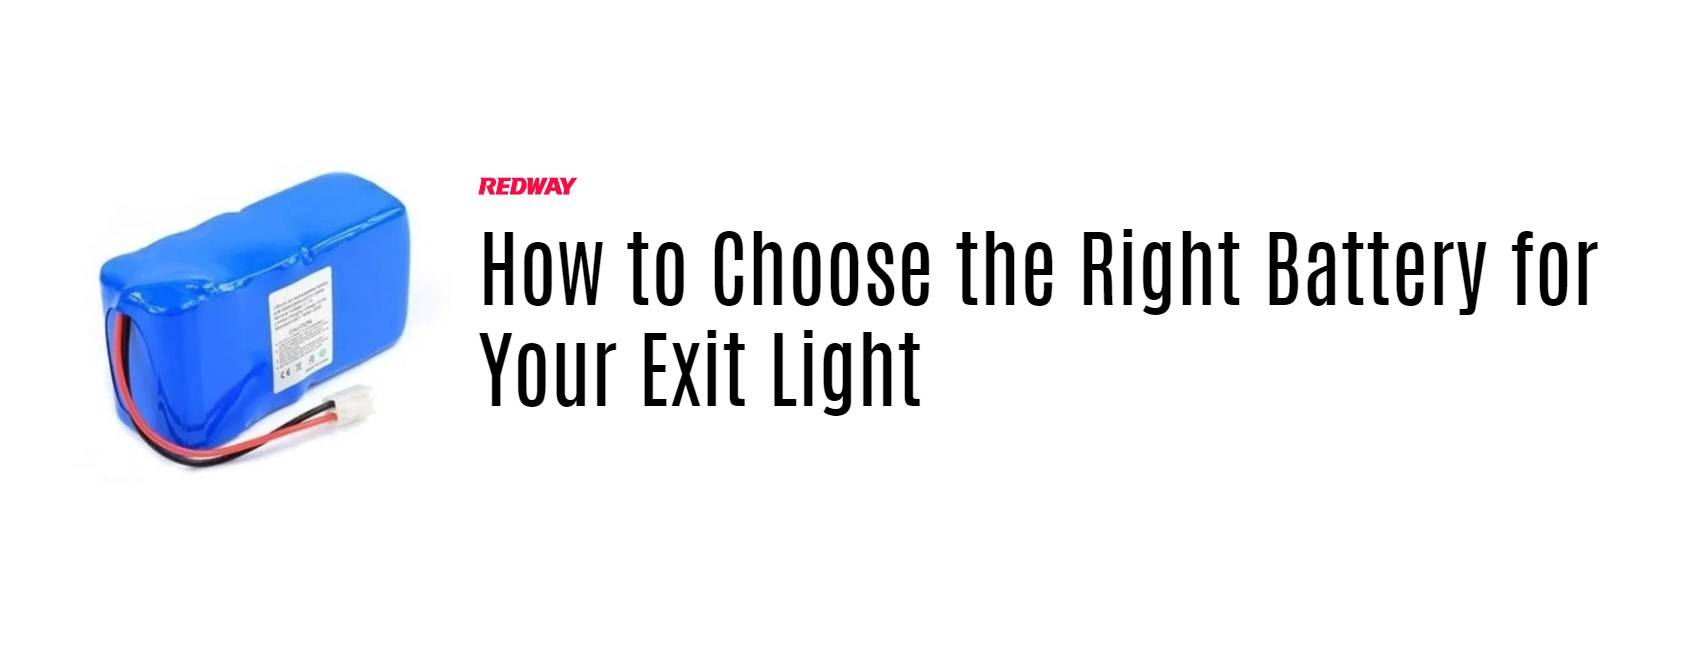 How to Choose the Right Battery for Your Exit Light. xit light lithium battery manufacturer factory redway power